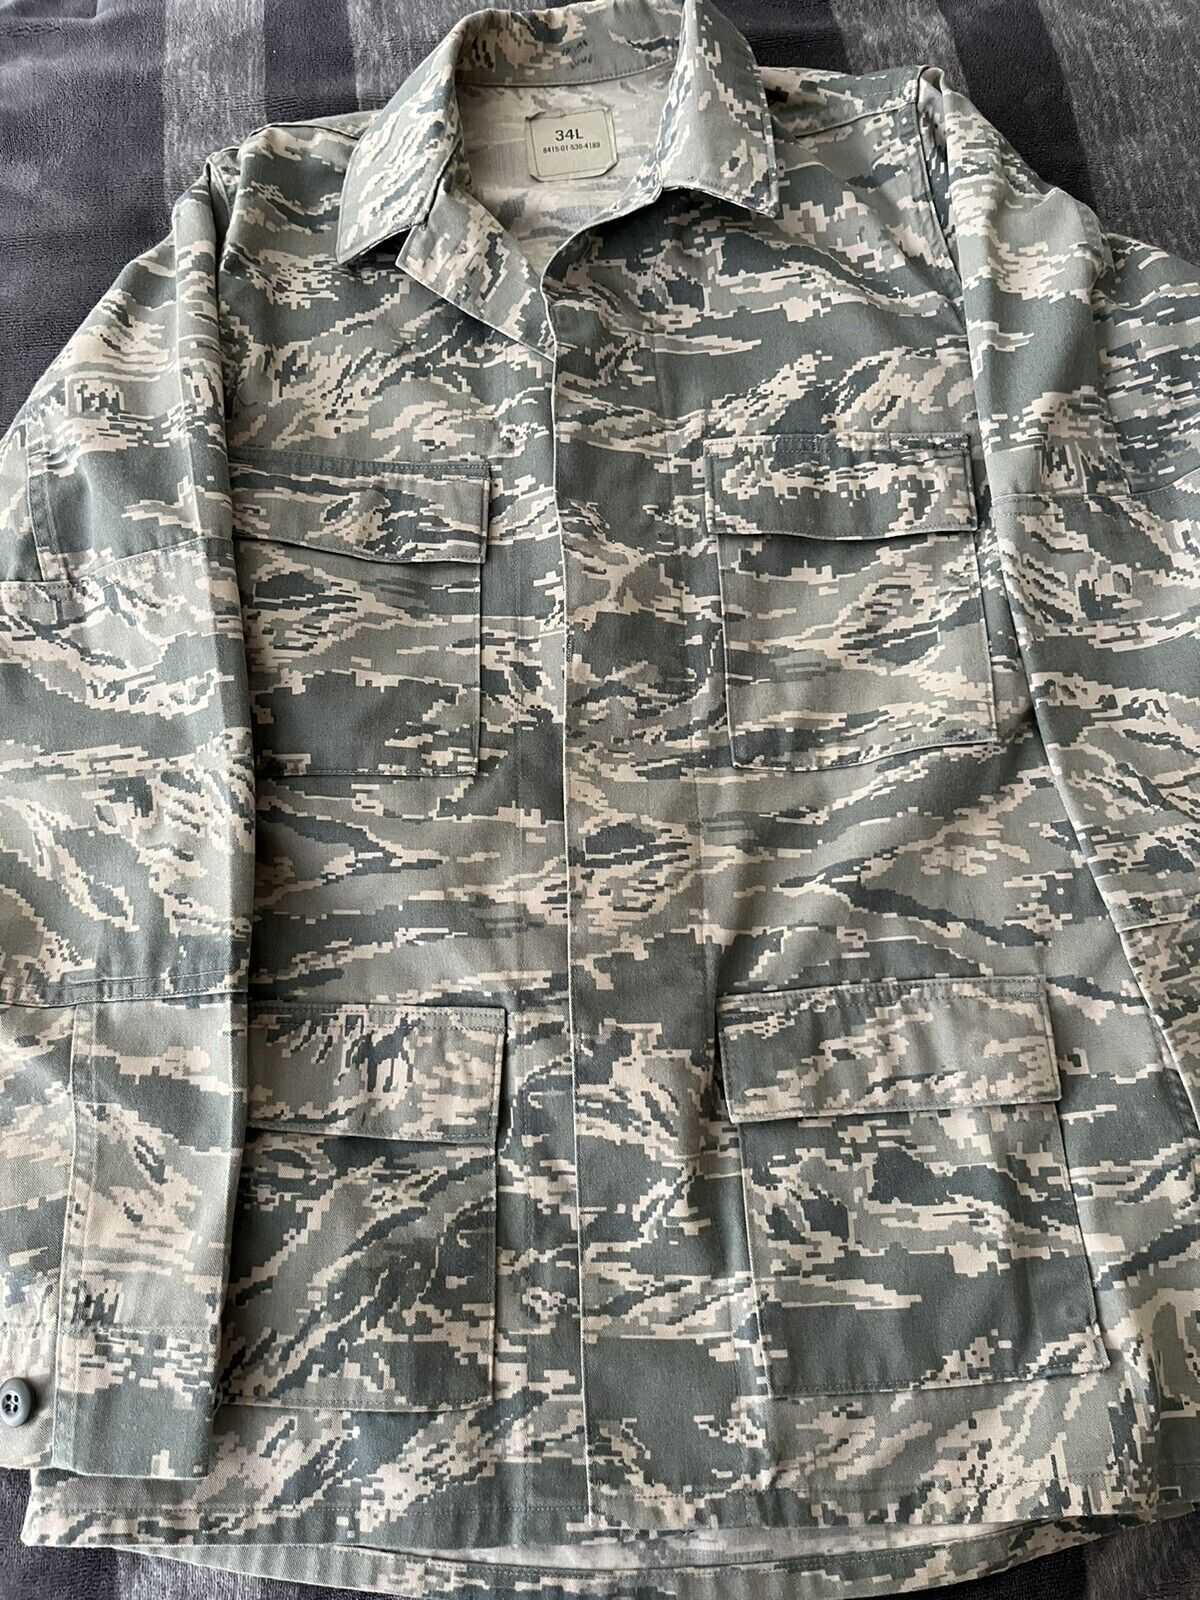 MILITARY AIR FORCE CAMOUFLAGE MEN\'S COAT/SHIRT - 8415-01-536-4189 - SIZE 34L